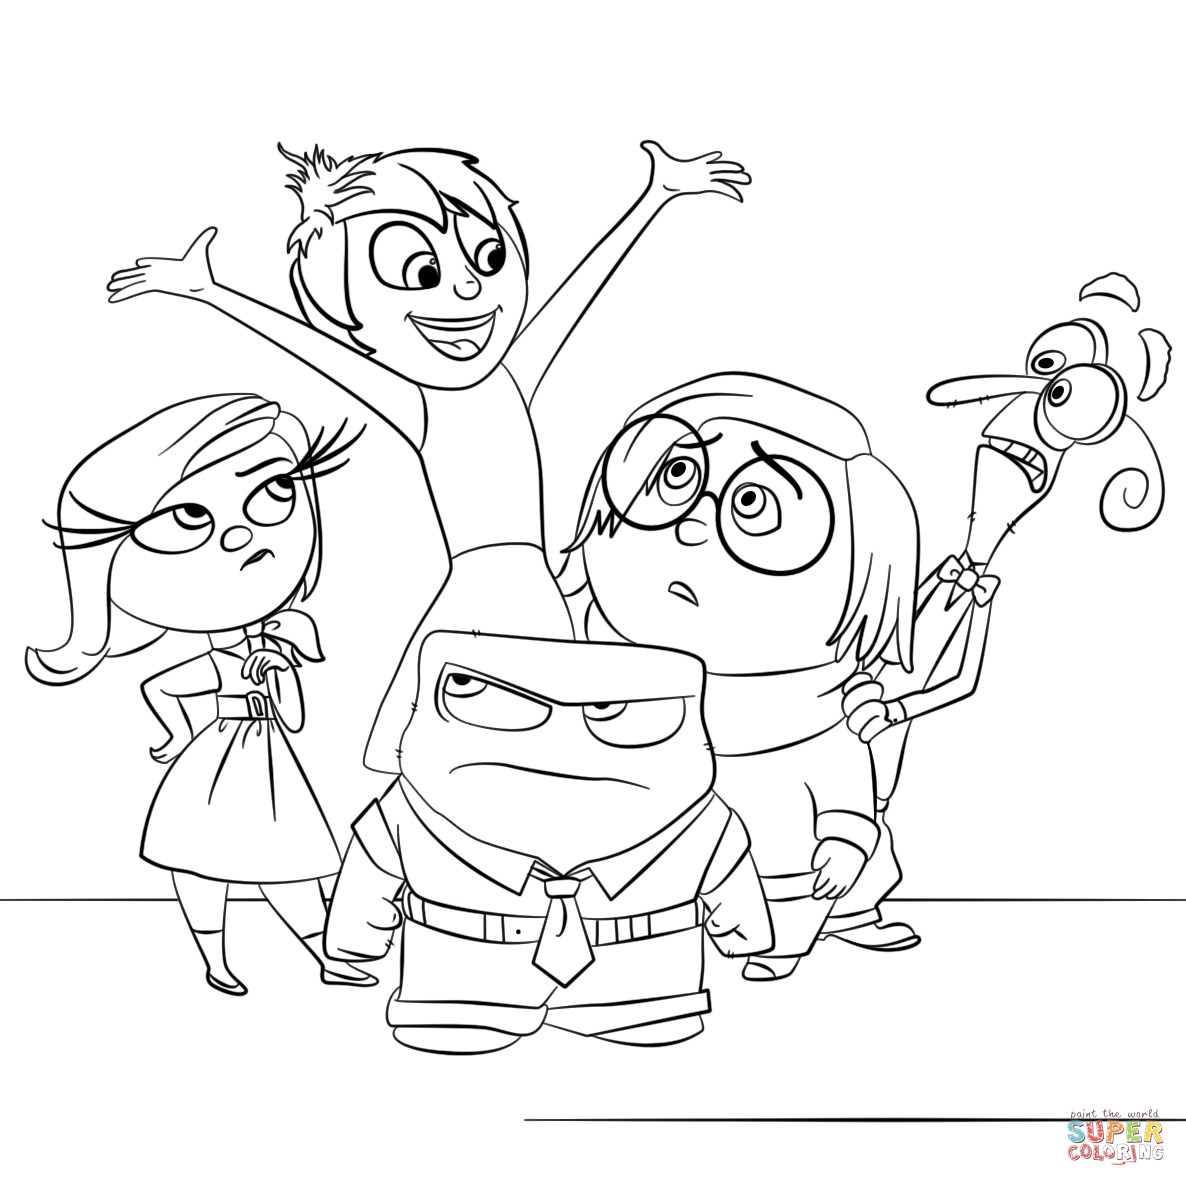 Coloring Pages Inside Out
 Inside Out All Characters coloring page